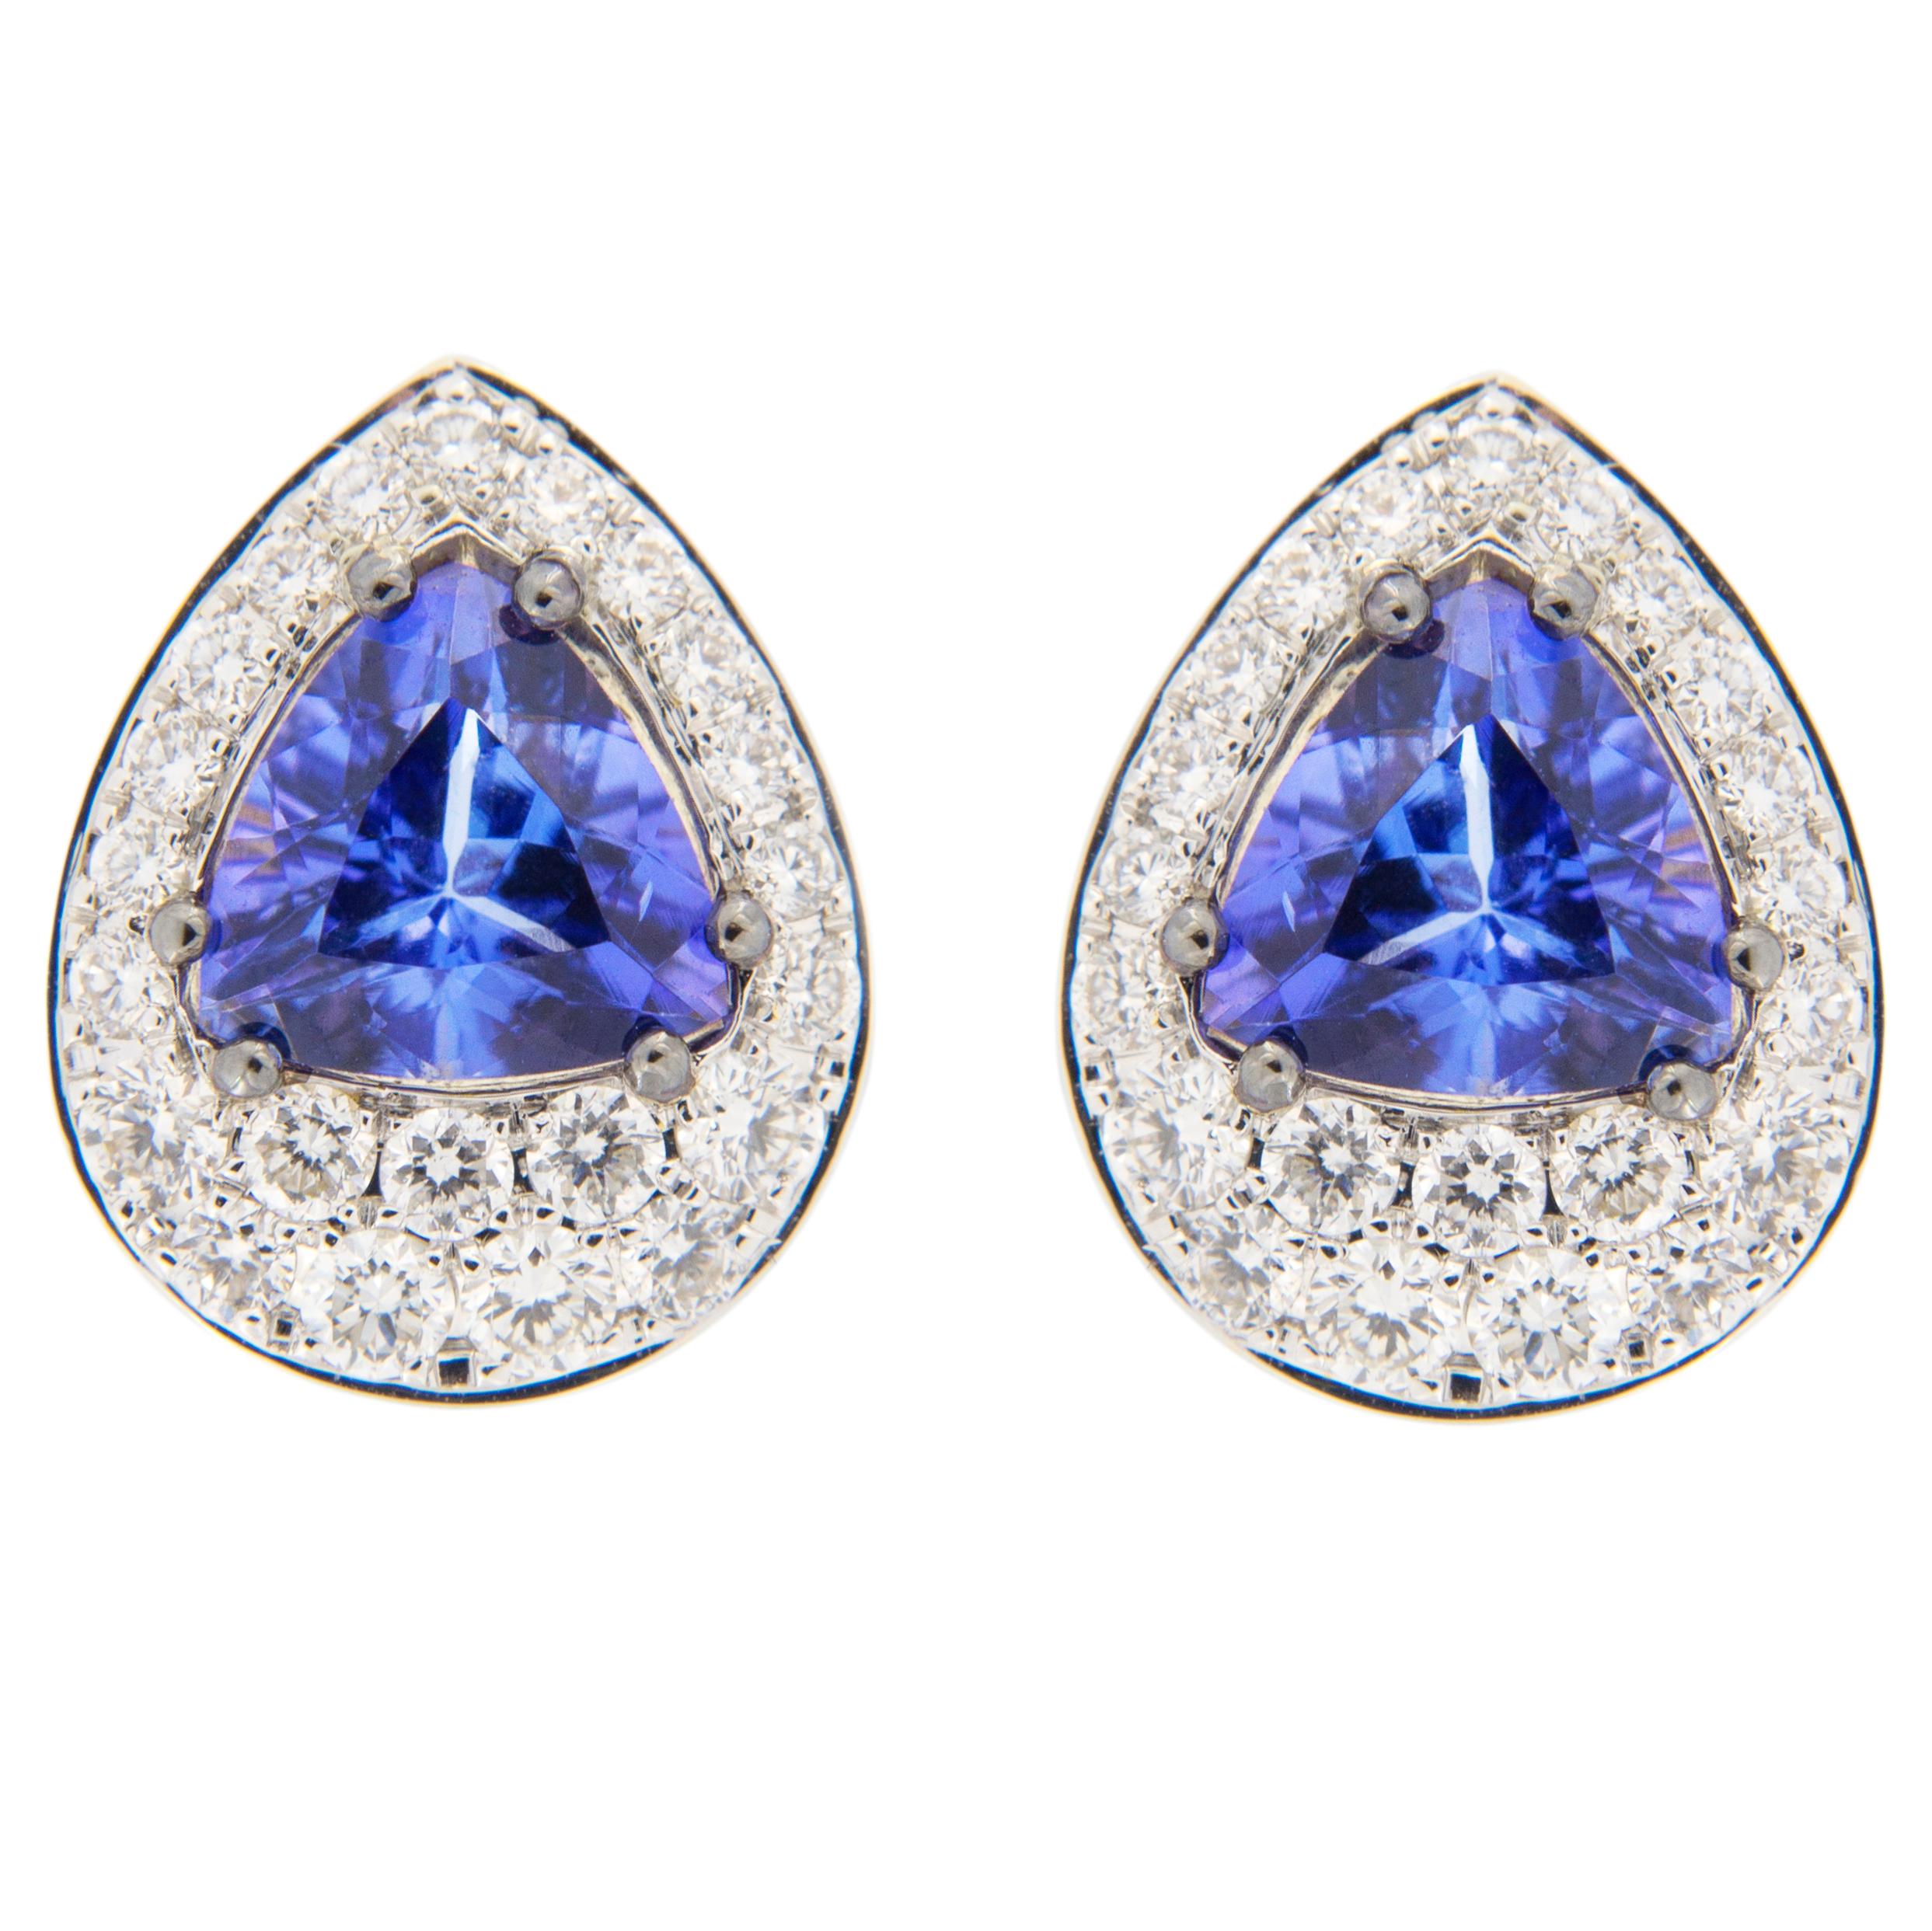 Jona design collection, hand crafted in Italy, 18 karat white and yellow gold stud earrings set with two triangle cut Tanzanite weighing 1.35 carats, surrounded by 44 brilliant cut white diamonds, F color, VVS1 clarity, weighing 0.48